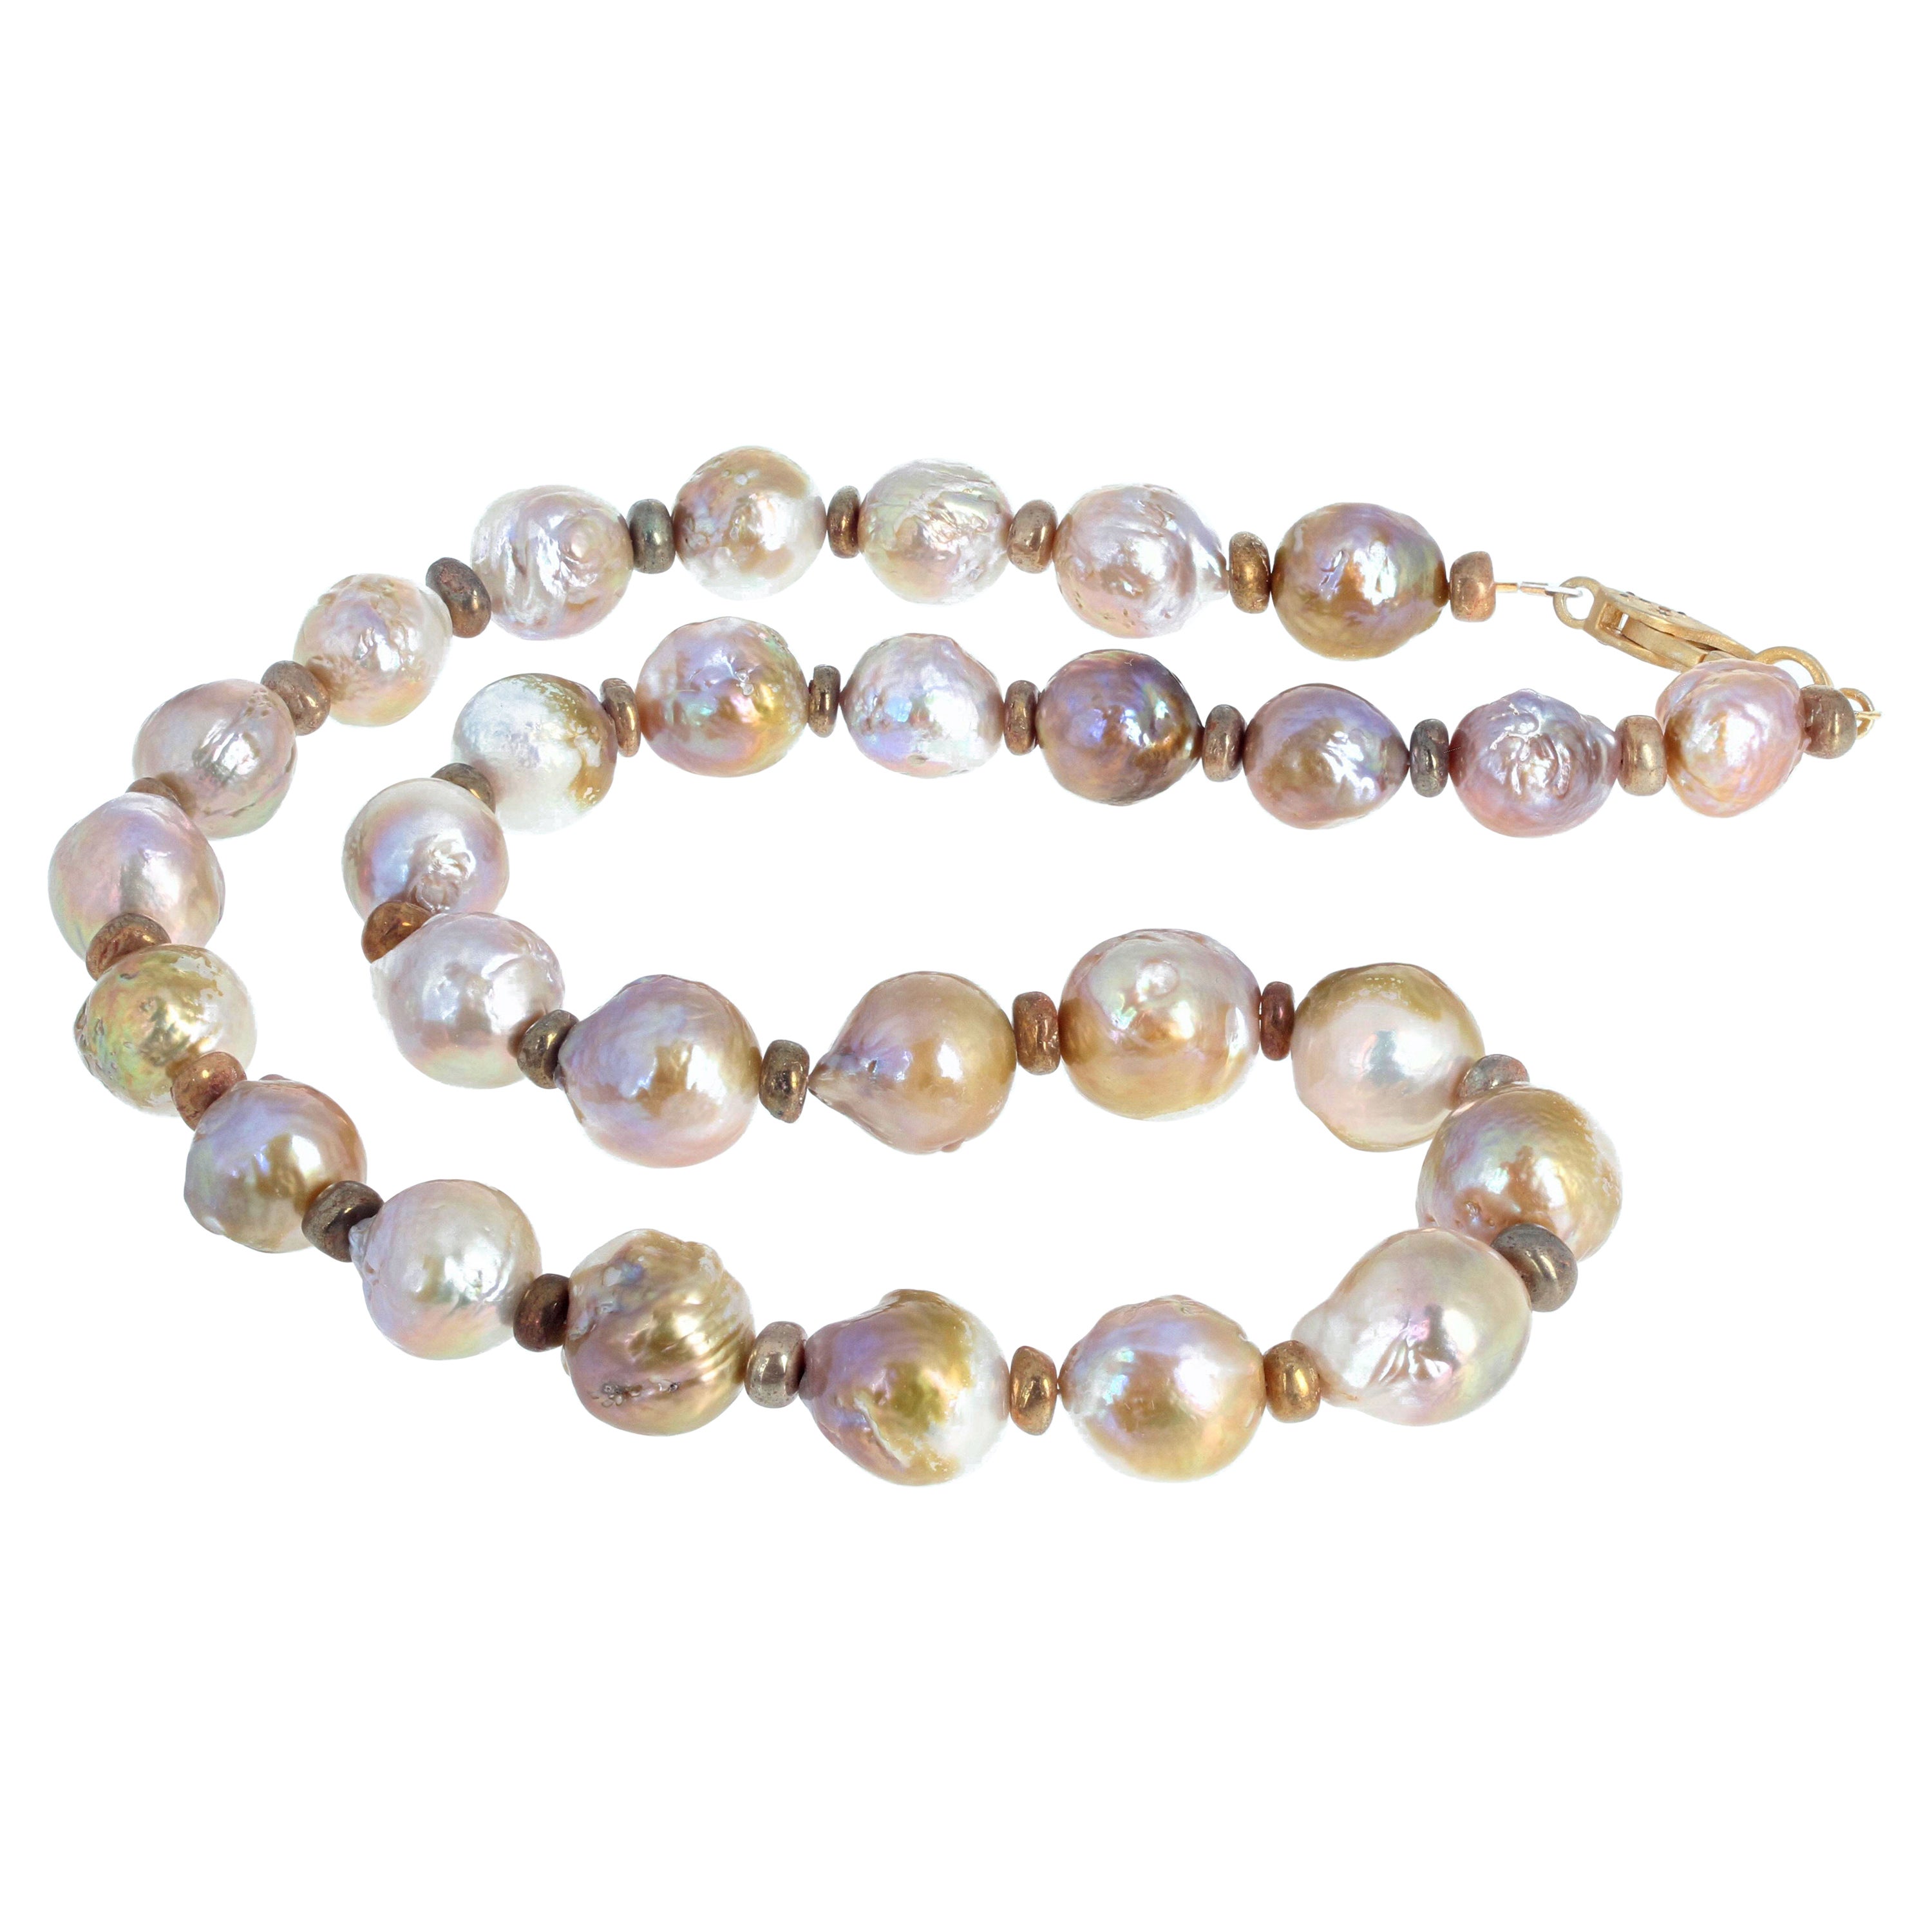 AJD Dramatic REAL Goldy Glowing Cultured Ocean Pearl Necklace For Sale